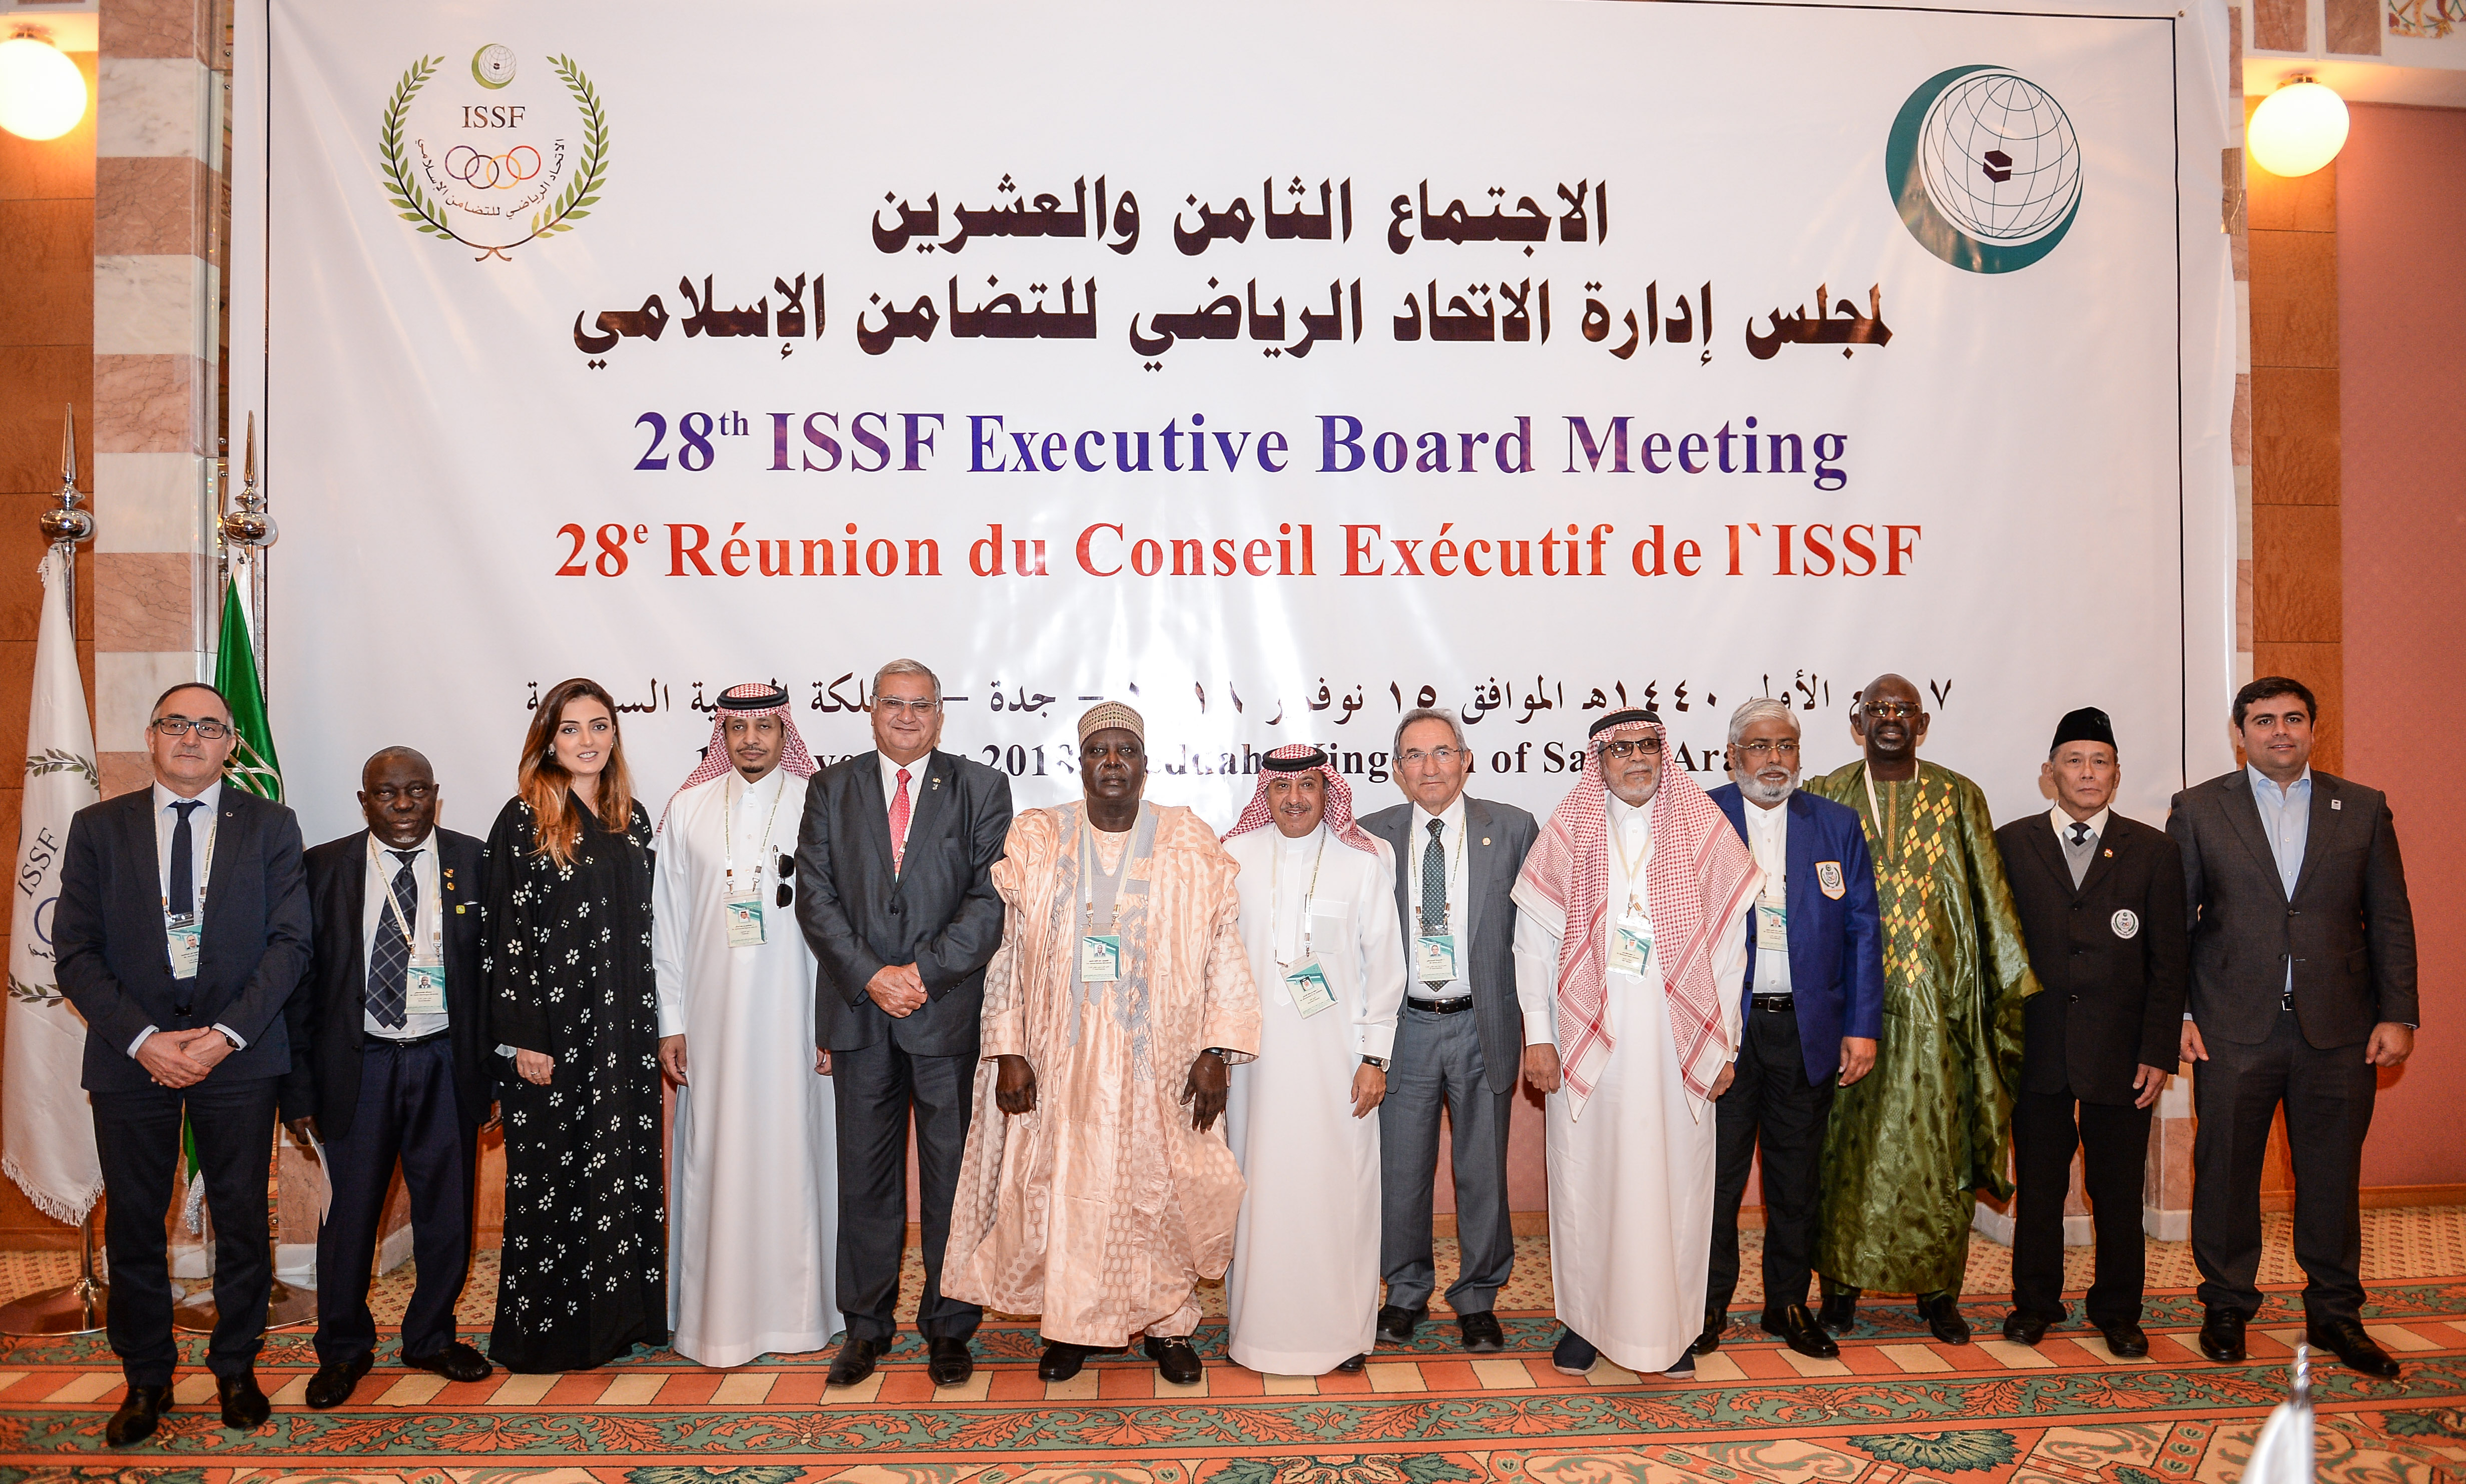  Jeddah hosts the 28th ISSF Executive Board Meeting